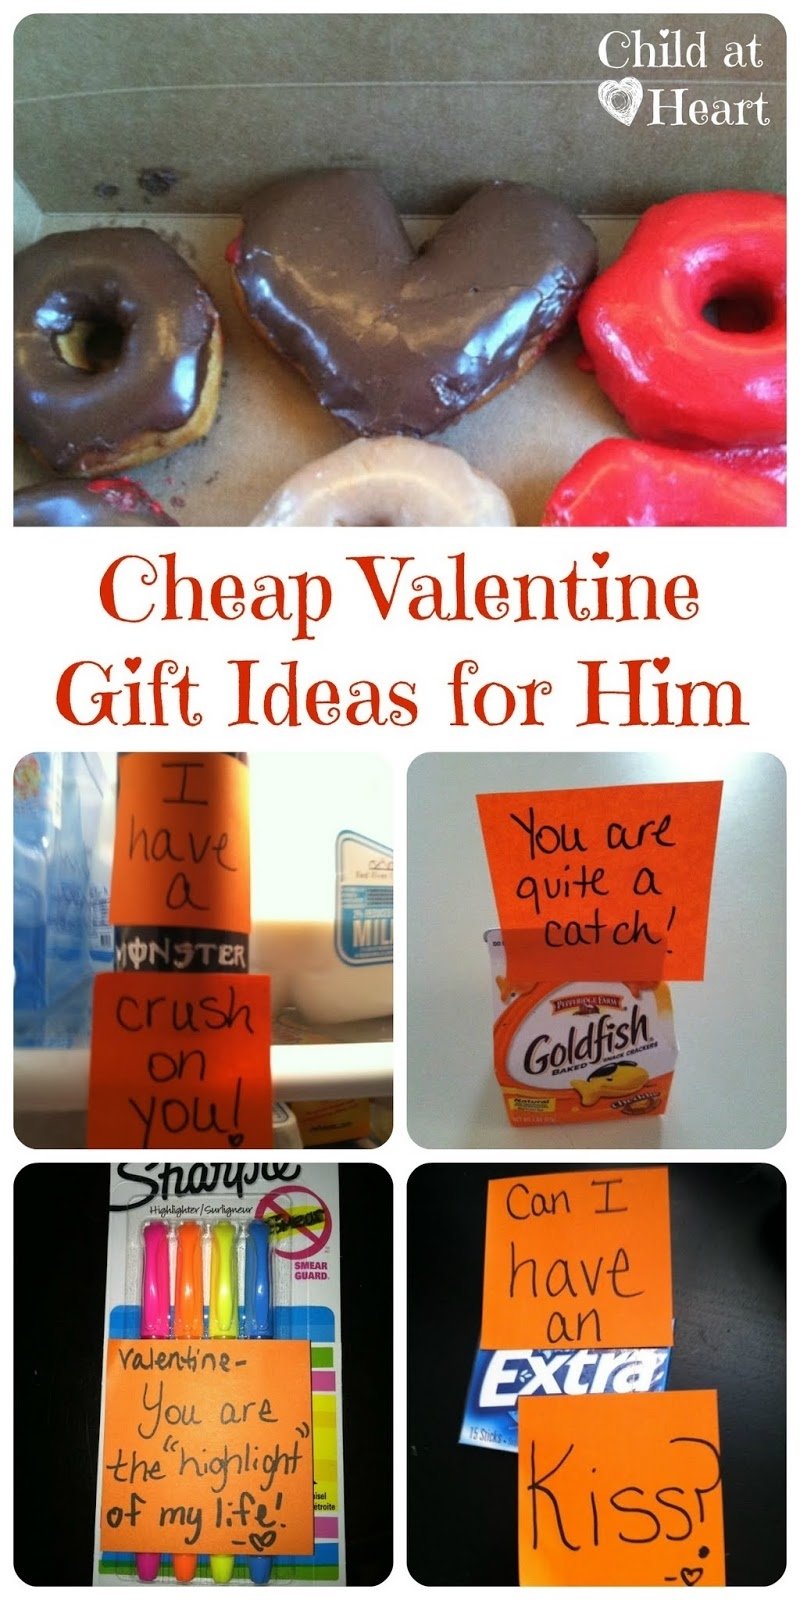 10 Fantastic Cheap Valentines Day Ideas For Him cheap valentine gift ideas for him child at heart blog 2022